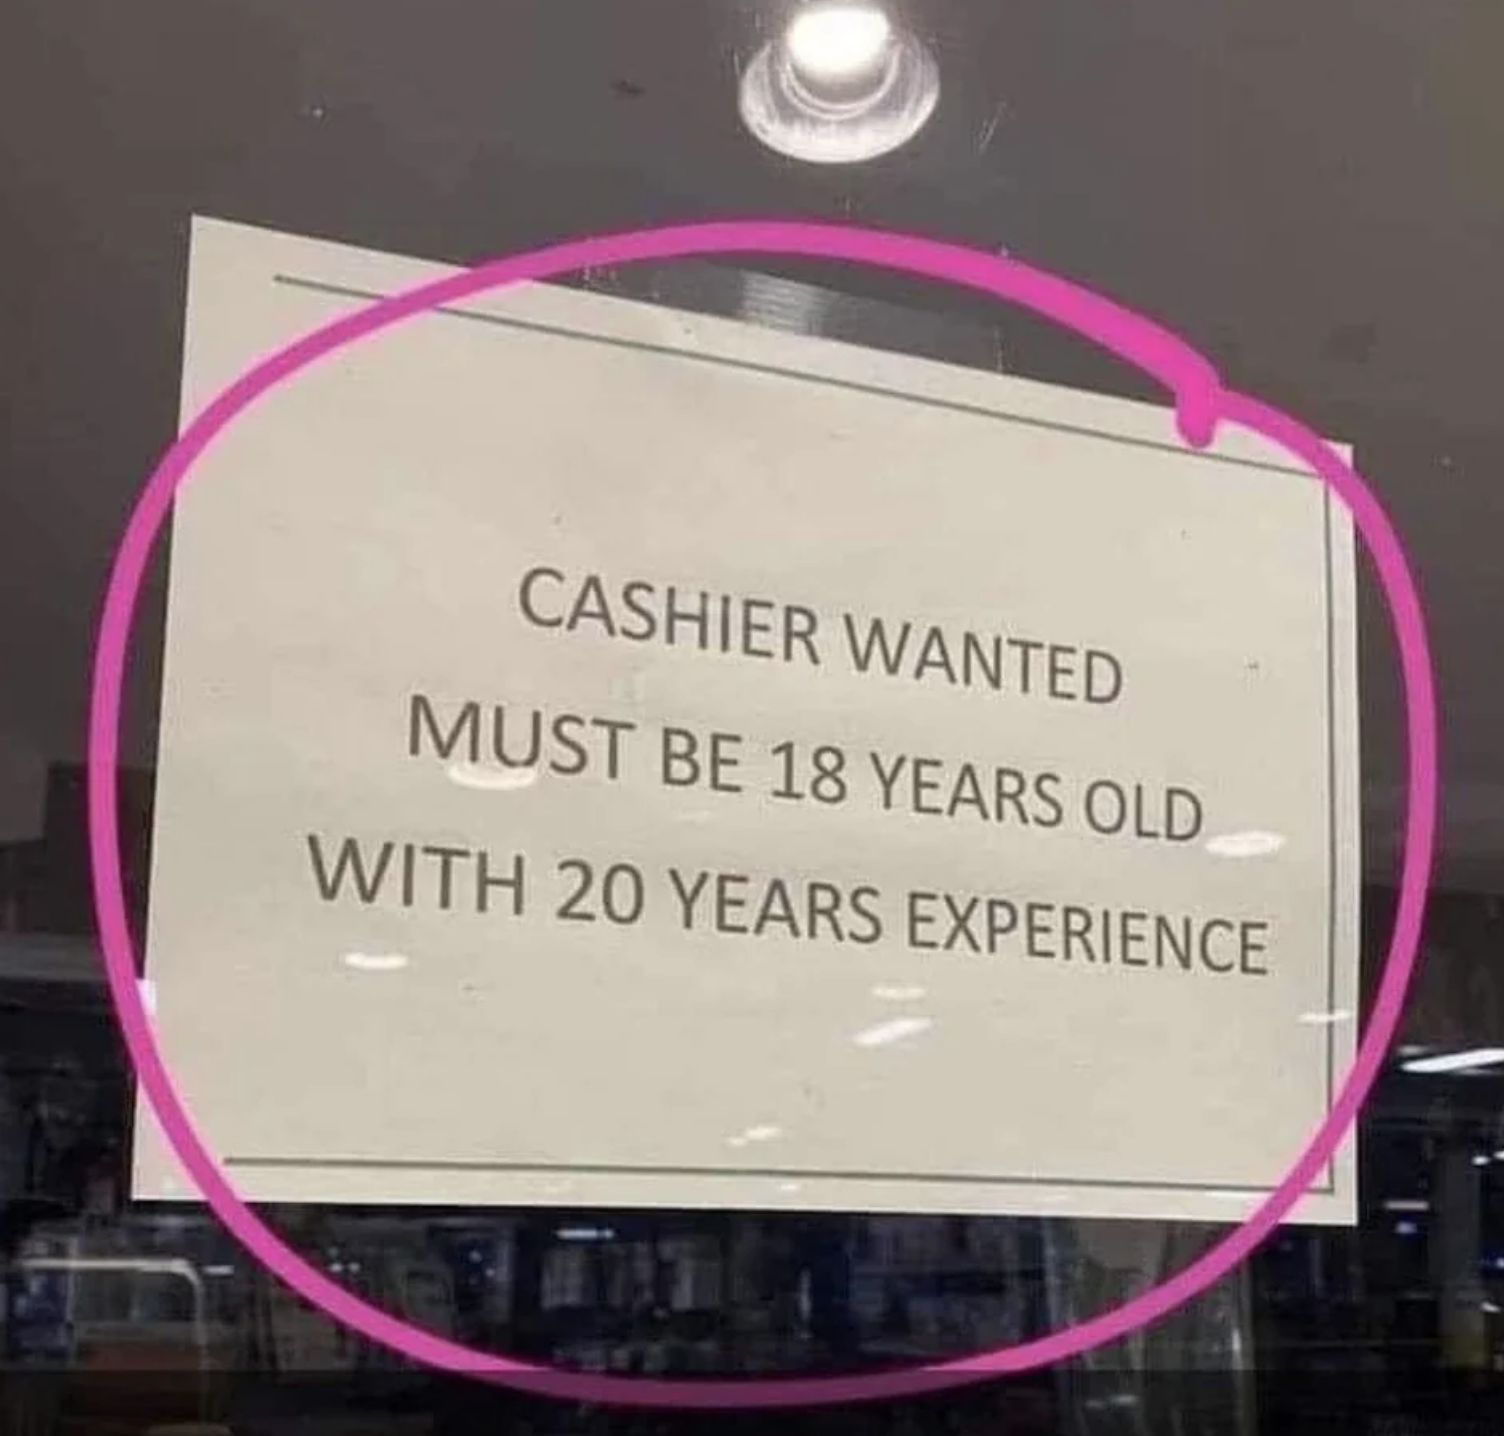 &quot;Must be 18 years old with 20 years experience&quot;